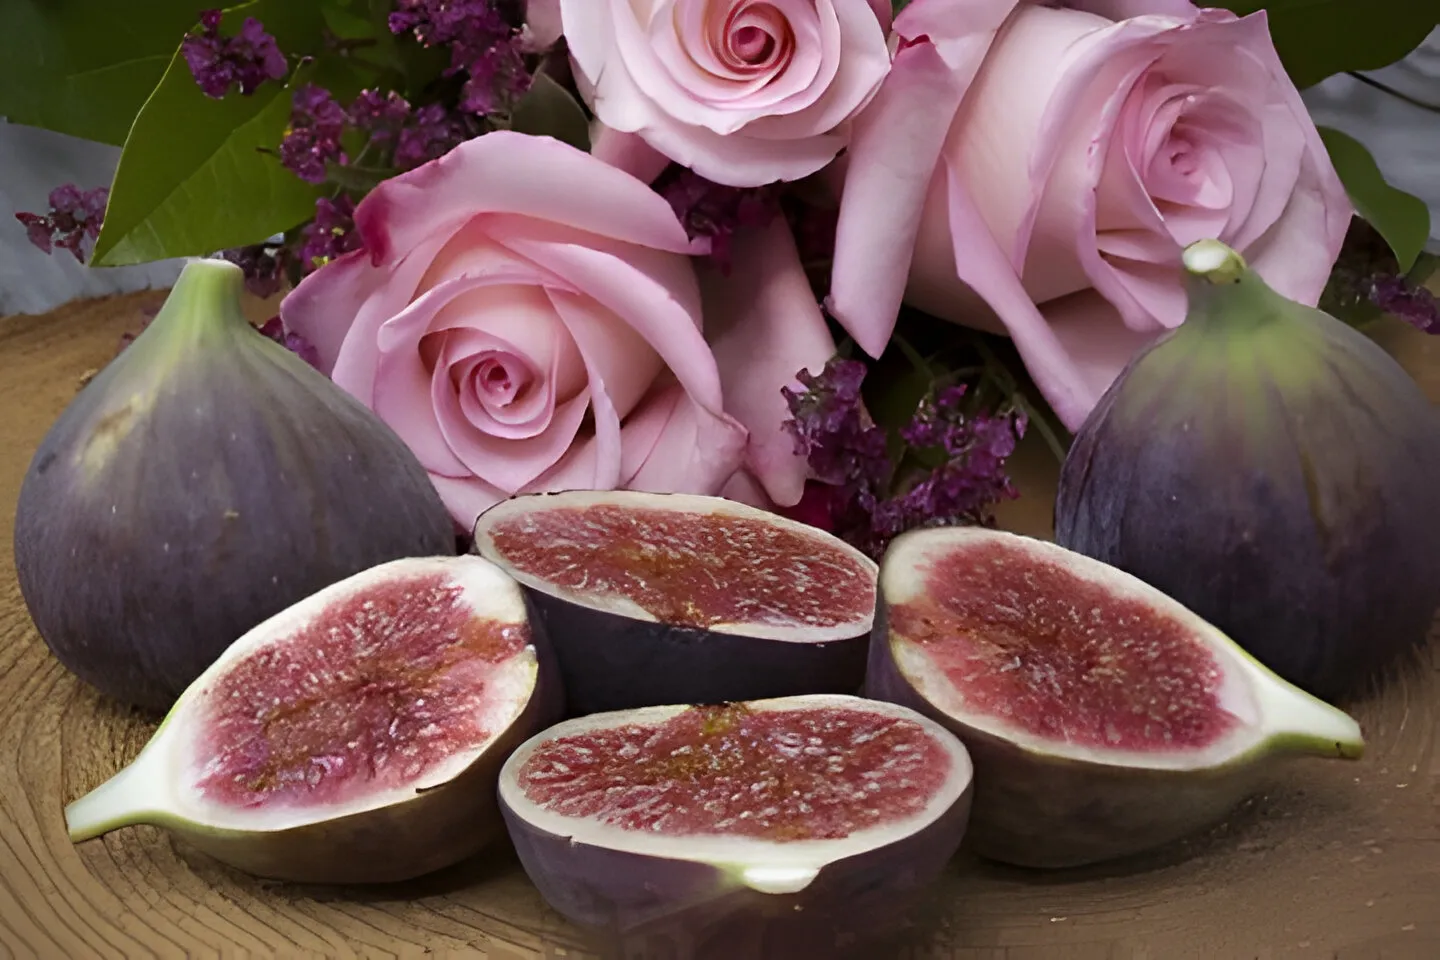 roses and figs on a table